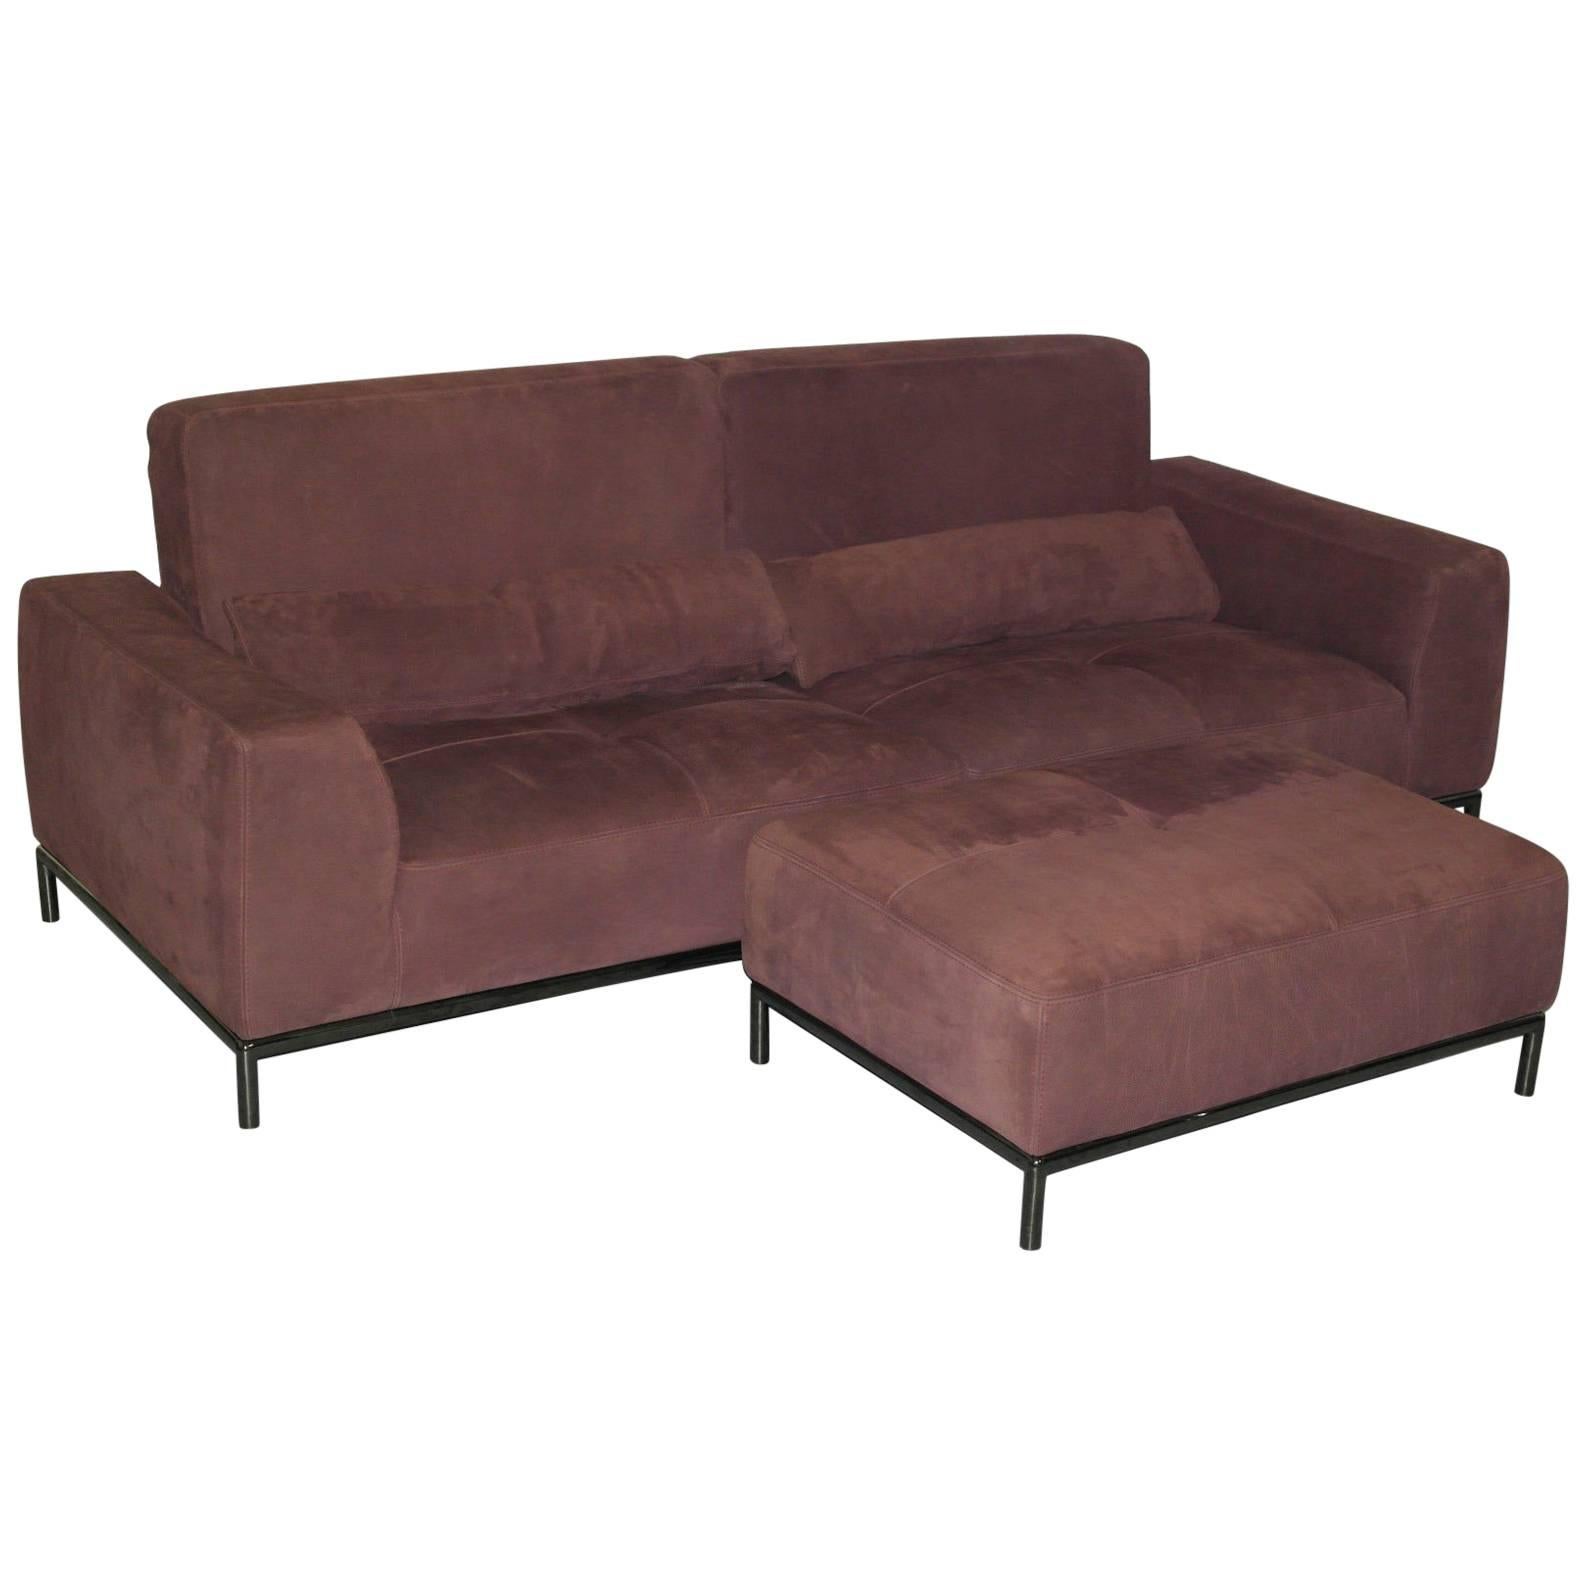 Nubuck Velvet Leather Recliner, Four-Seater Sofa and Footstool